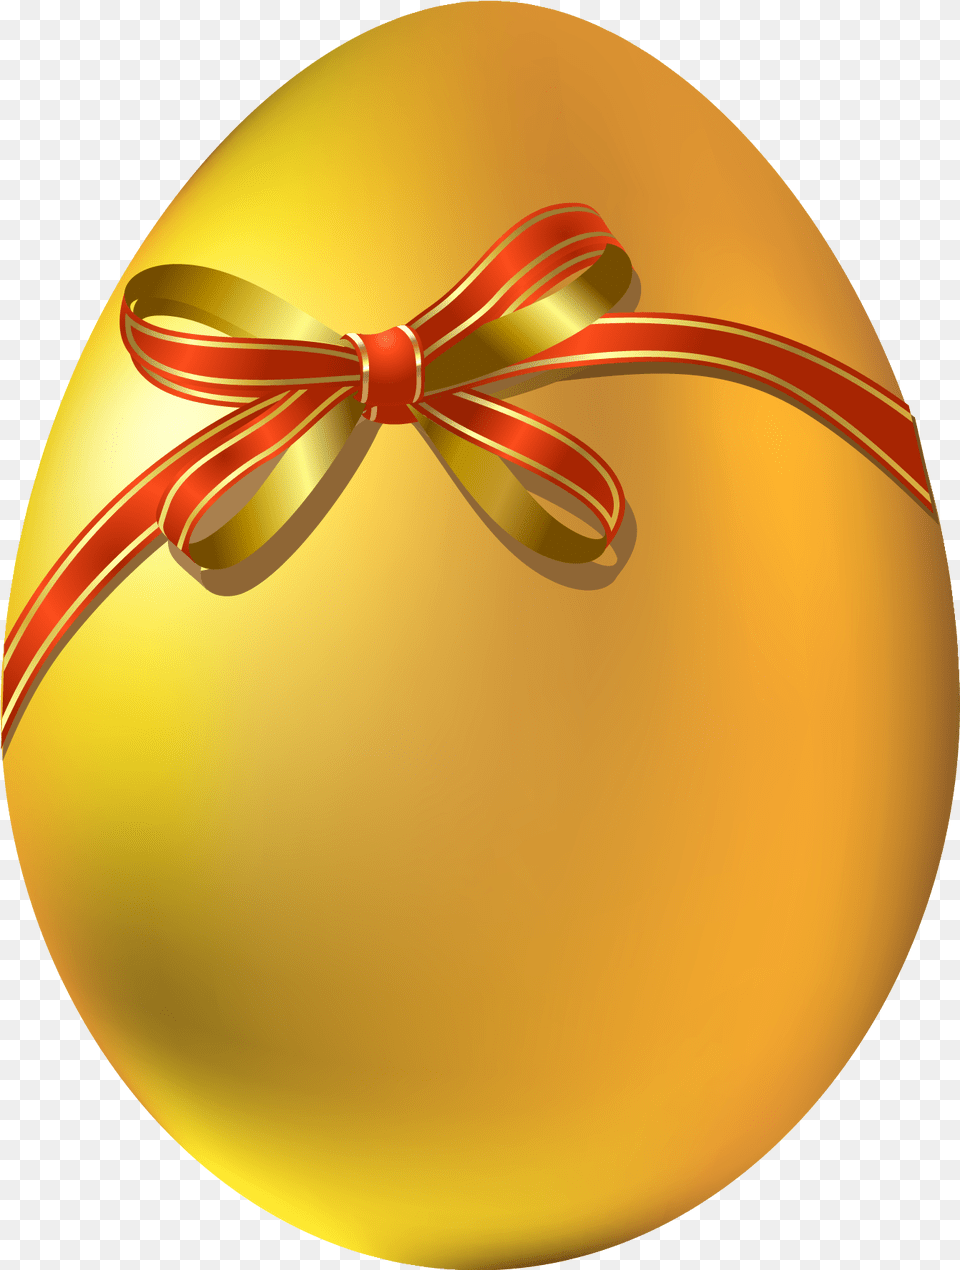 Gold Easter Egg With Red Bow Clipart Images Of Easter Eggs, Easter Egg, Food, Astronomy, Moon Free Transparent Png